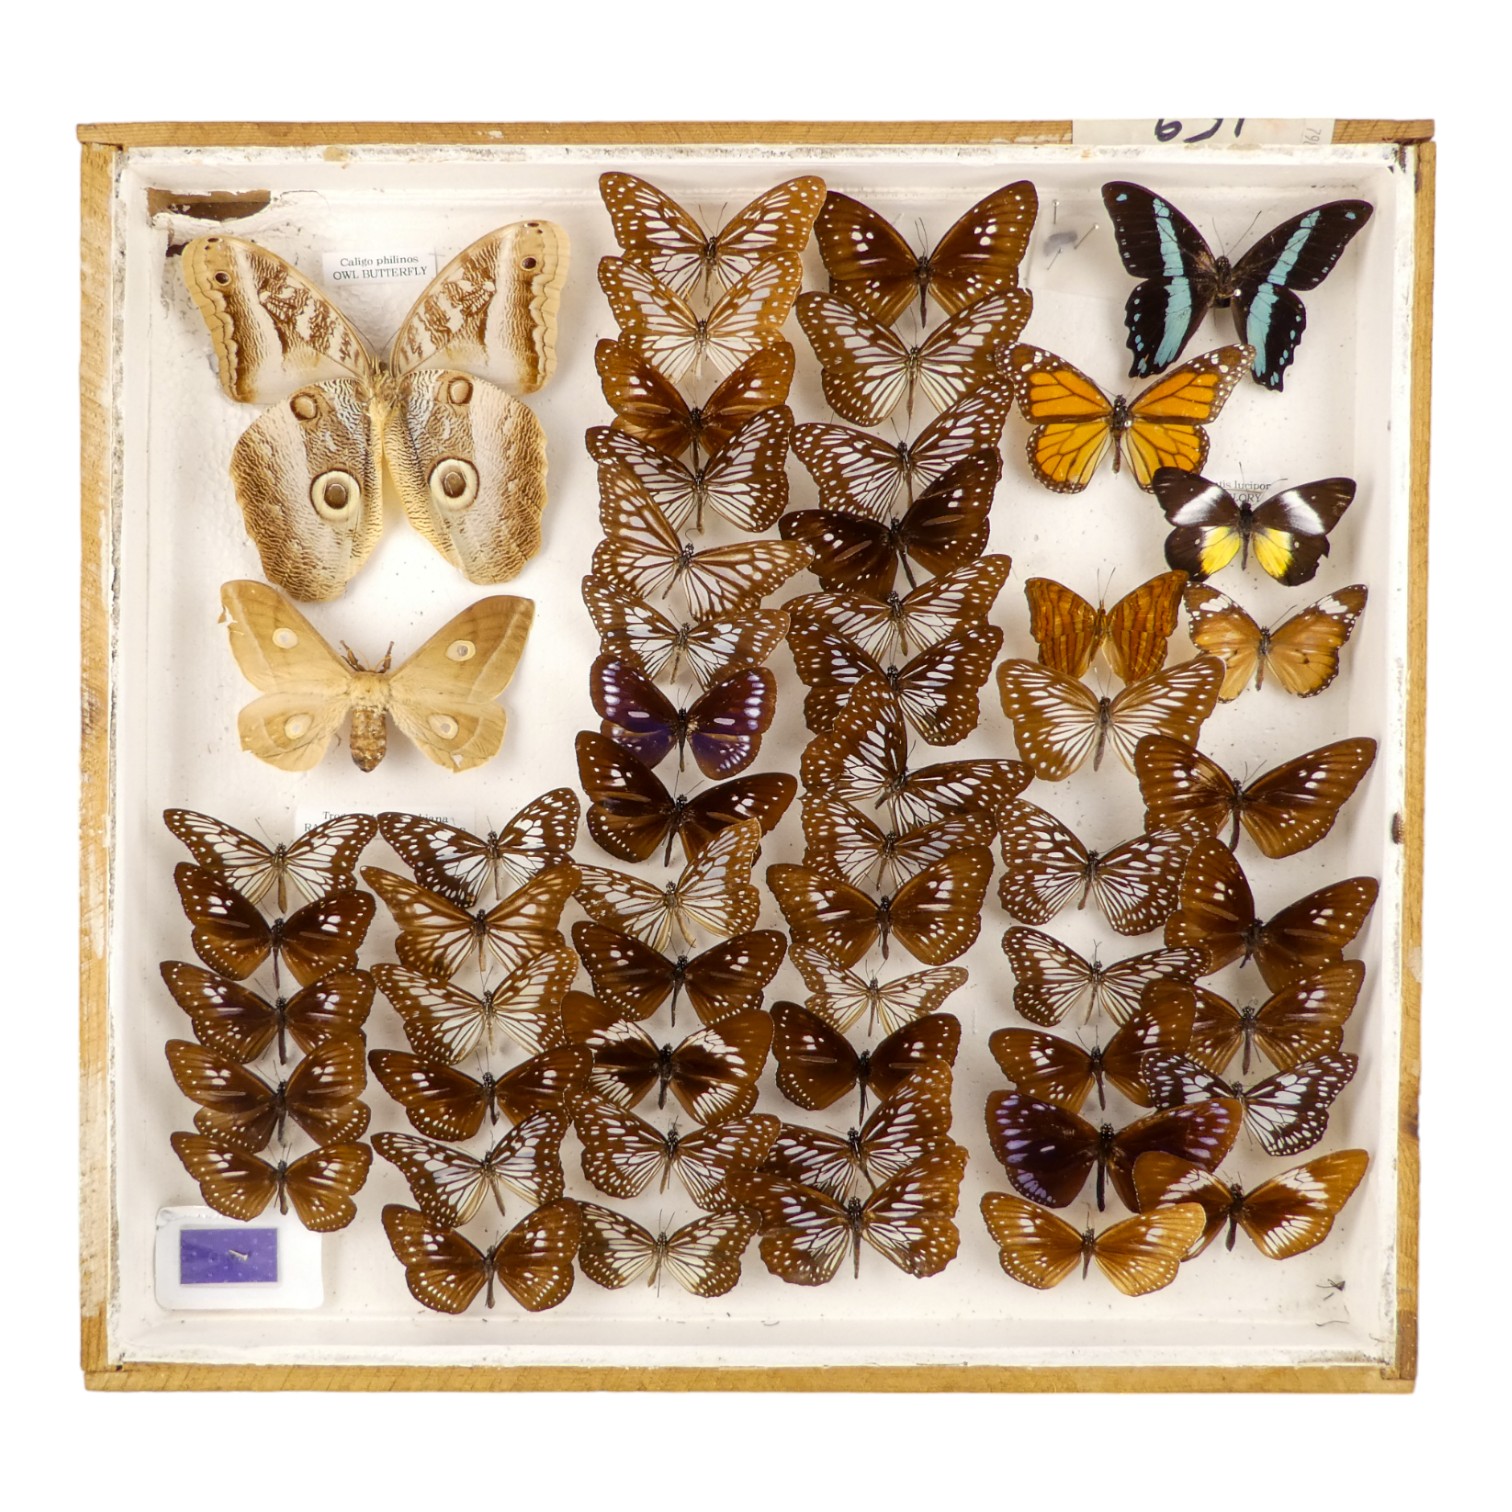 A case of butterflies in broadly six rows - including Illioneus Giant Owl, Chestnut Tiger and Delias